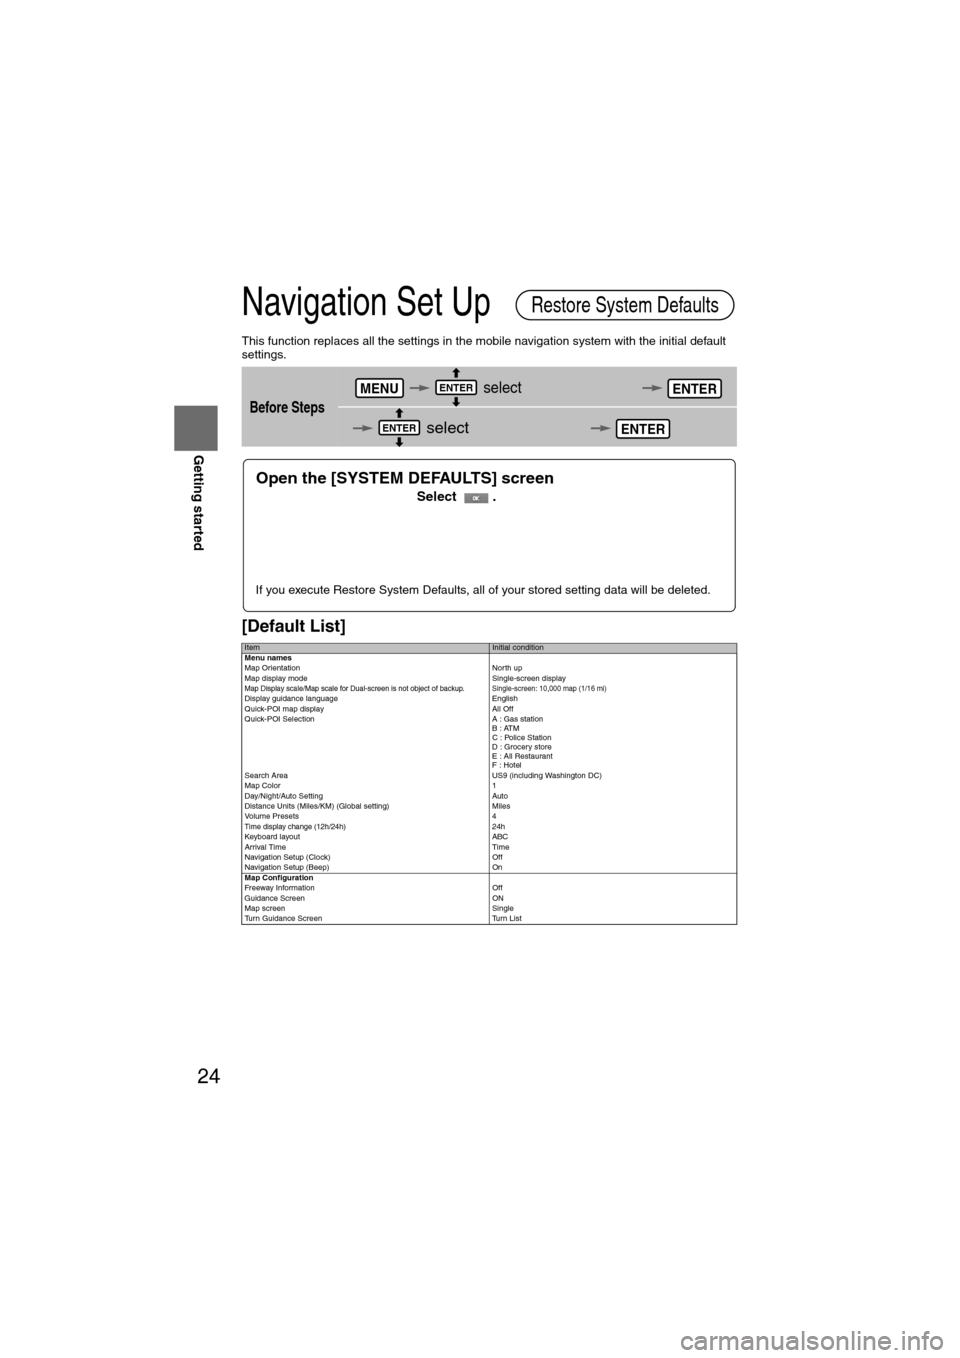 MAZDA MODEL 6 2008  Owners Manual (in English) 24
RoutingAddress 
Book
Getting started
Navigation Set Up
This function replaces all the settings in the mobile navigation system with the initial default 
settings.
[Default List]
Before Steps
    se